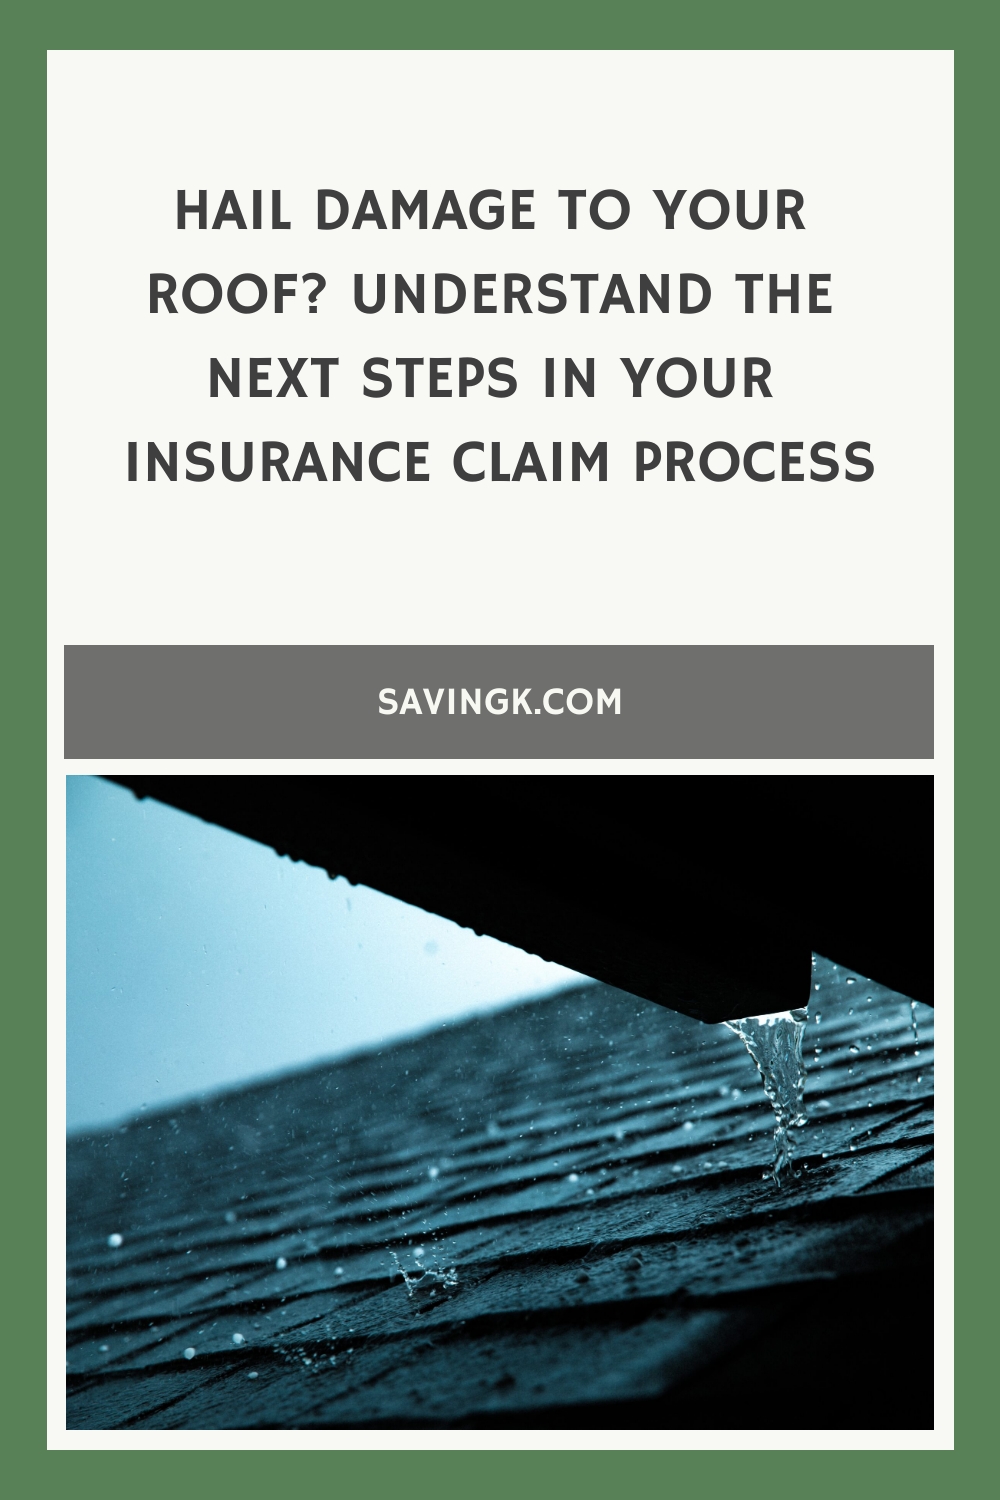 Hail Damage to Your Roof? Understand the Next Steps in Your Insurance Claim Process